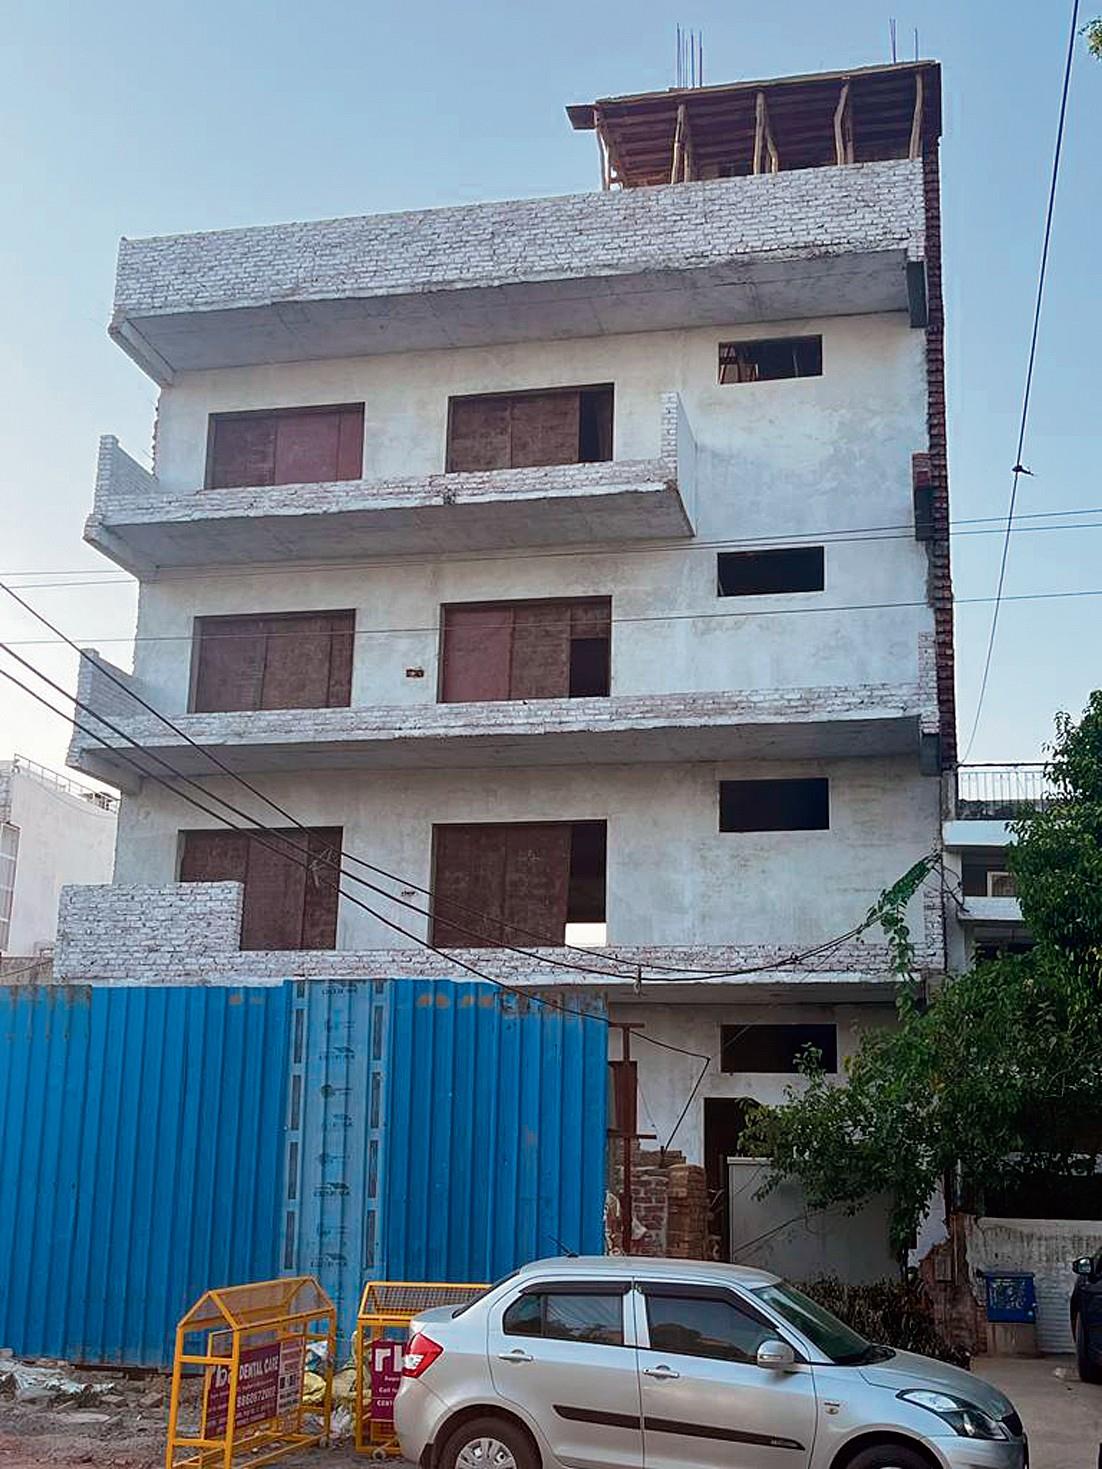 Choked sewer pipes, no parking space: Downside of houses on stilts in Faridabad